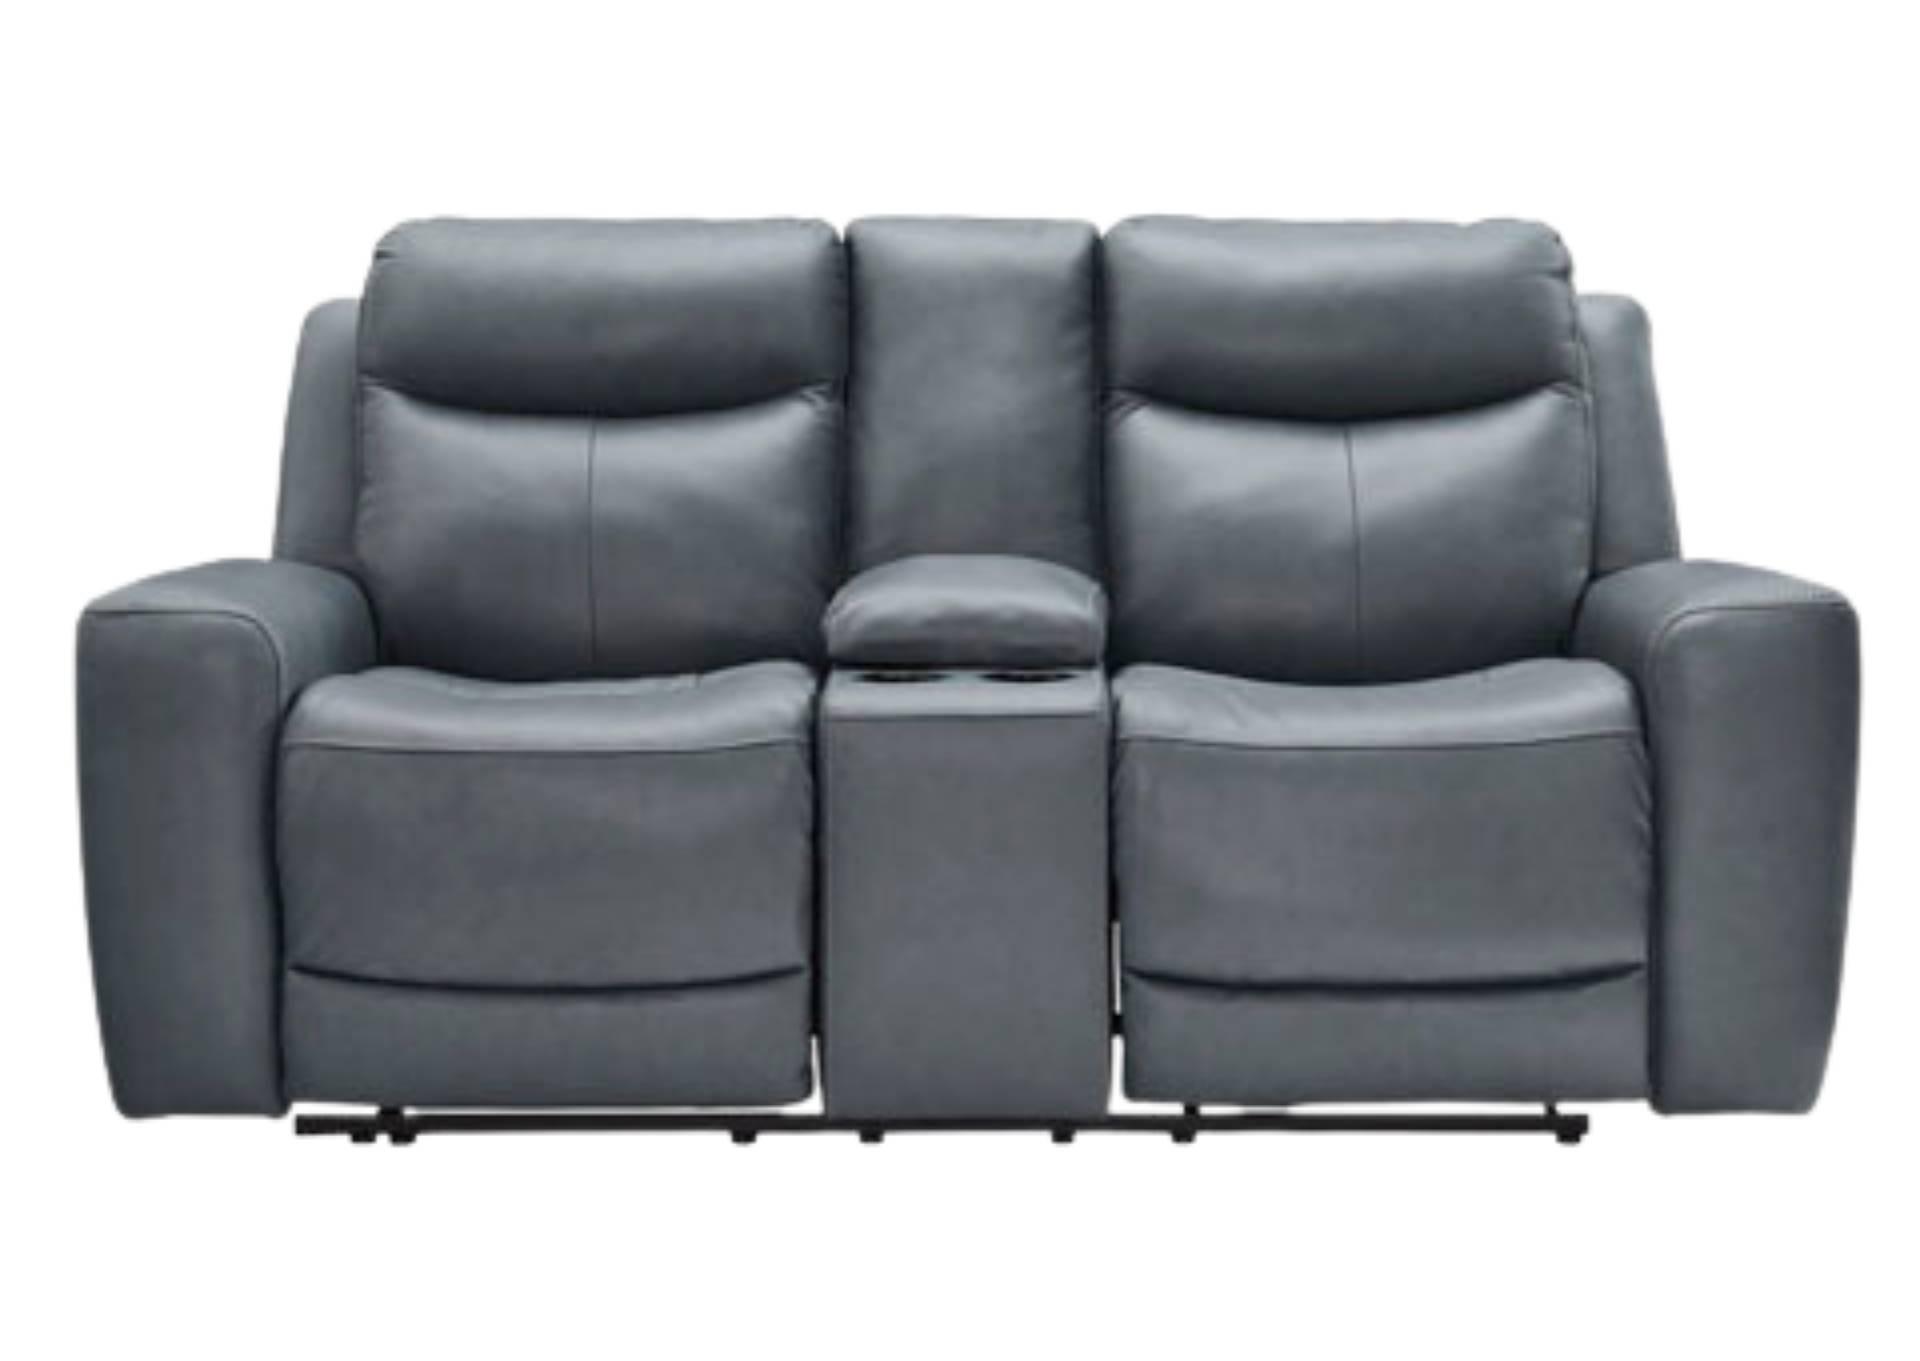 MINDANAO STEEL LEATHER 2P POWER RECLINING LOVESEAT WITH CONSOLE